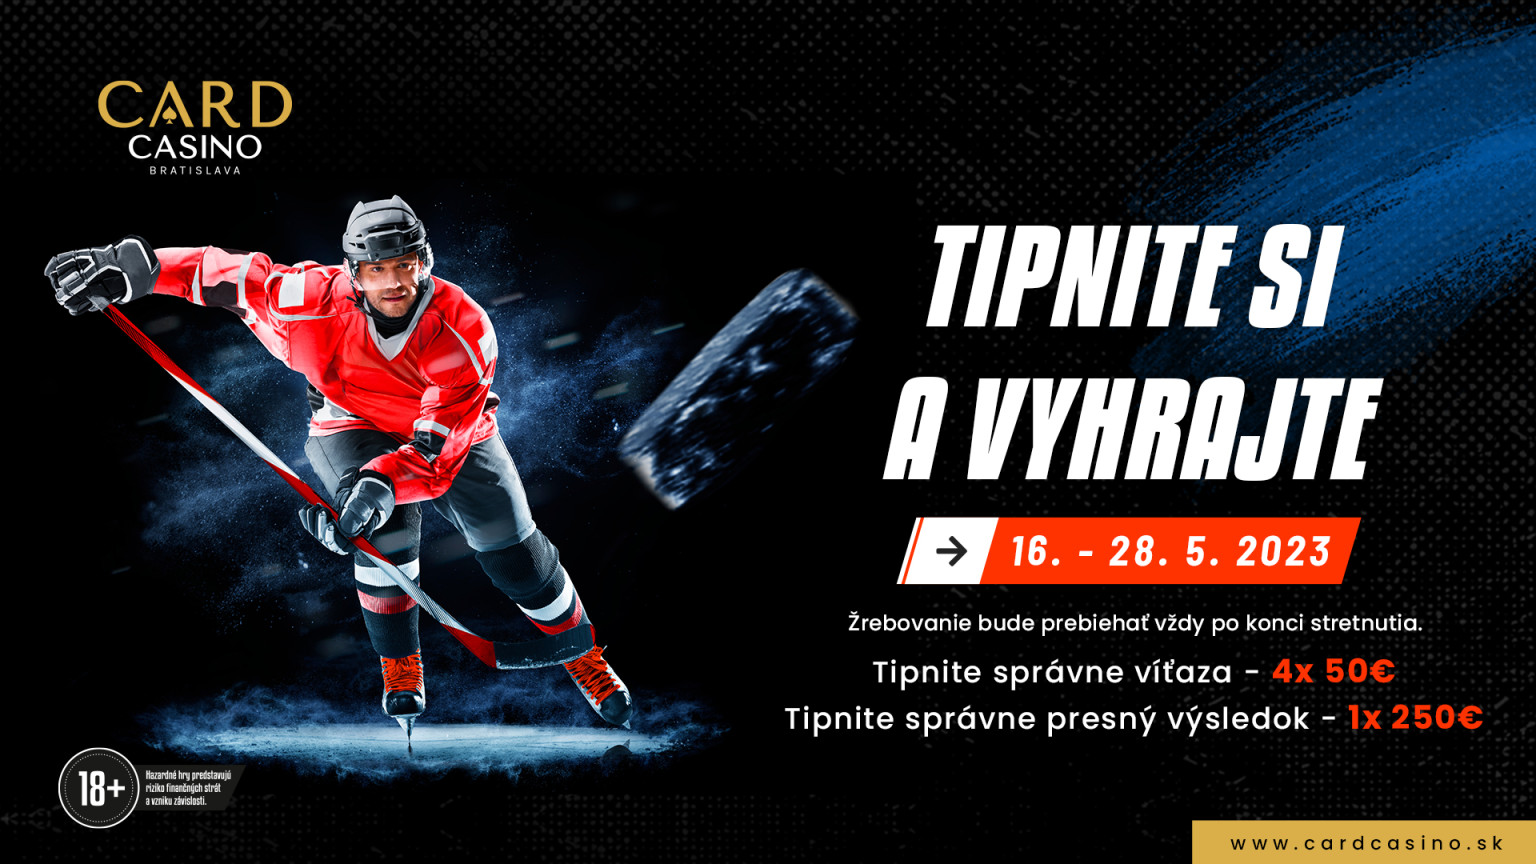 Enjoy the World Cup of Hockey at Card Casino Bratislava and win daily